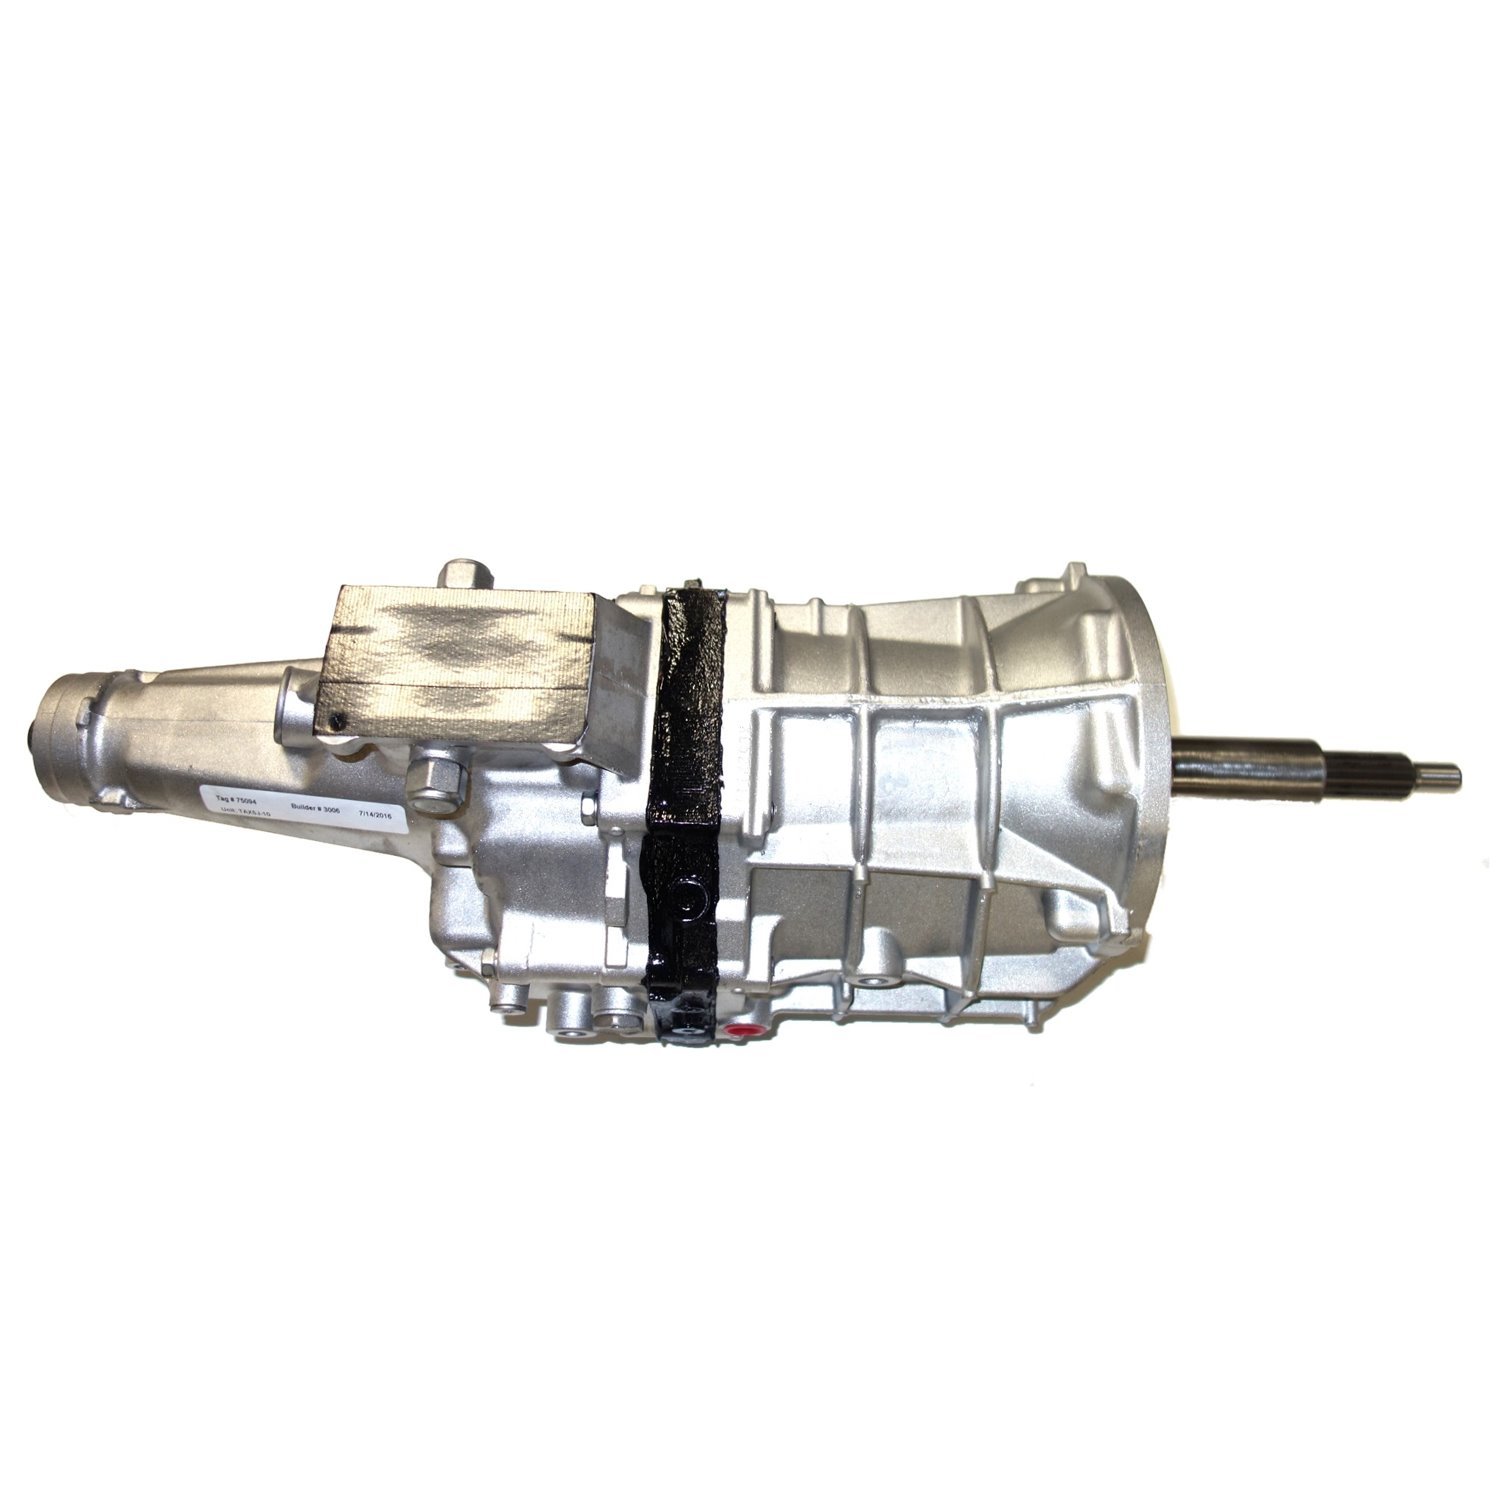 Remanufactured AX5 Manual Transmission for Jeep 92-93 Wrangler, 2WD, 5 Speed